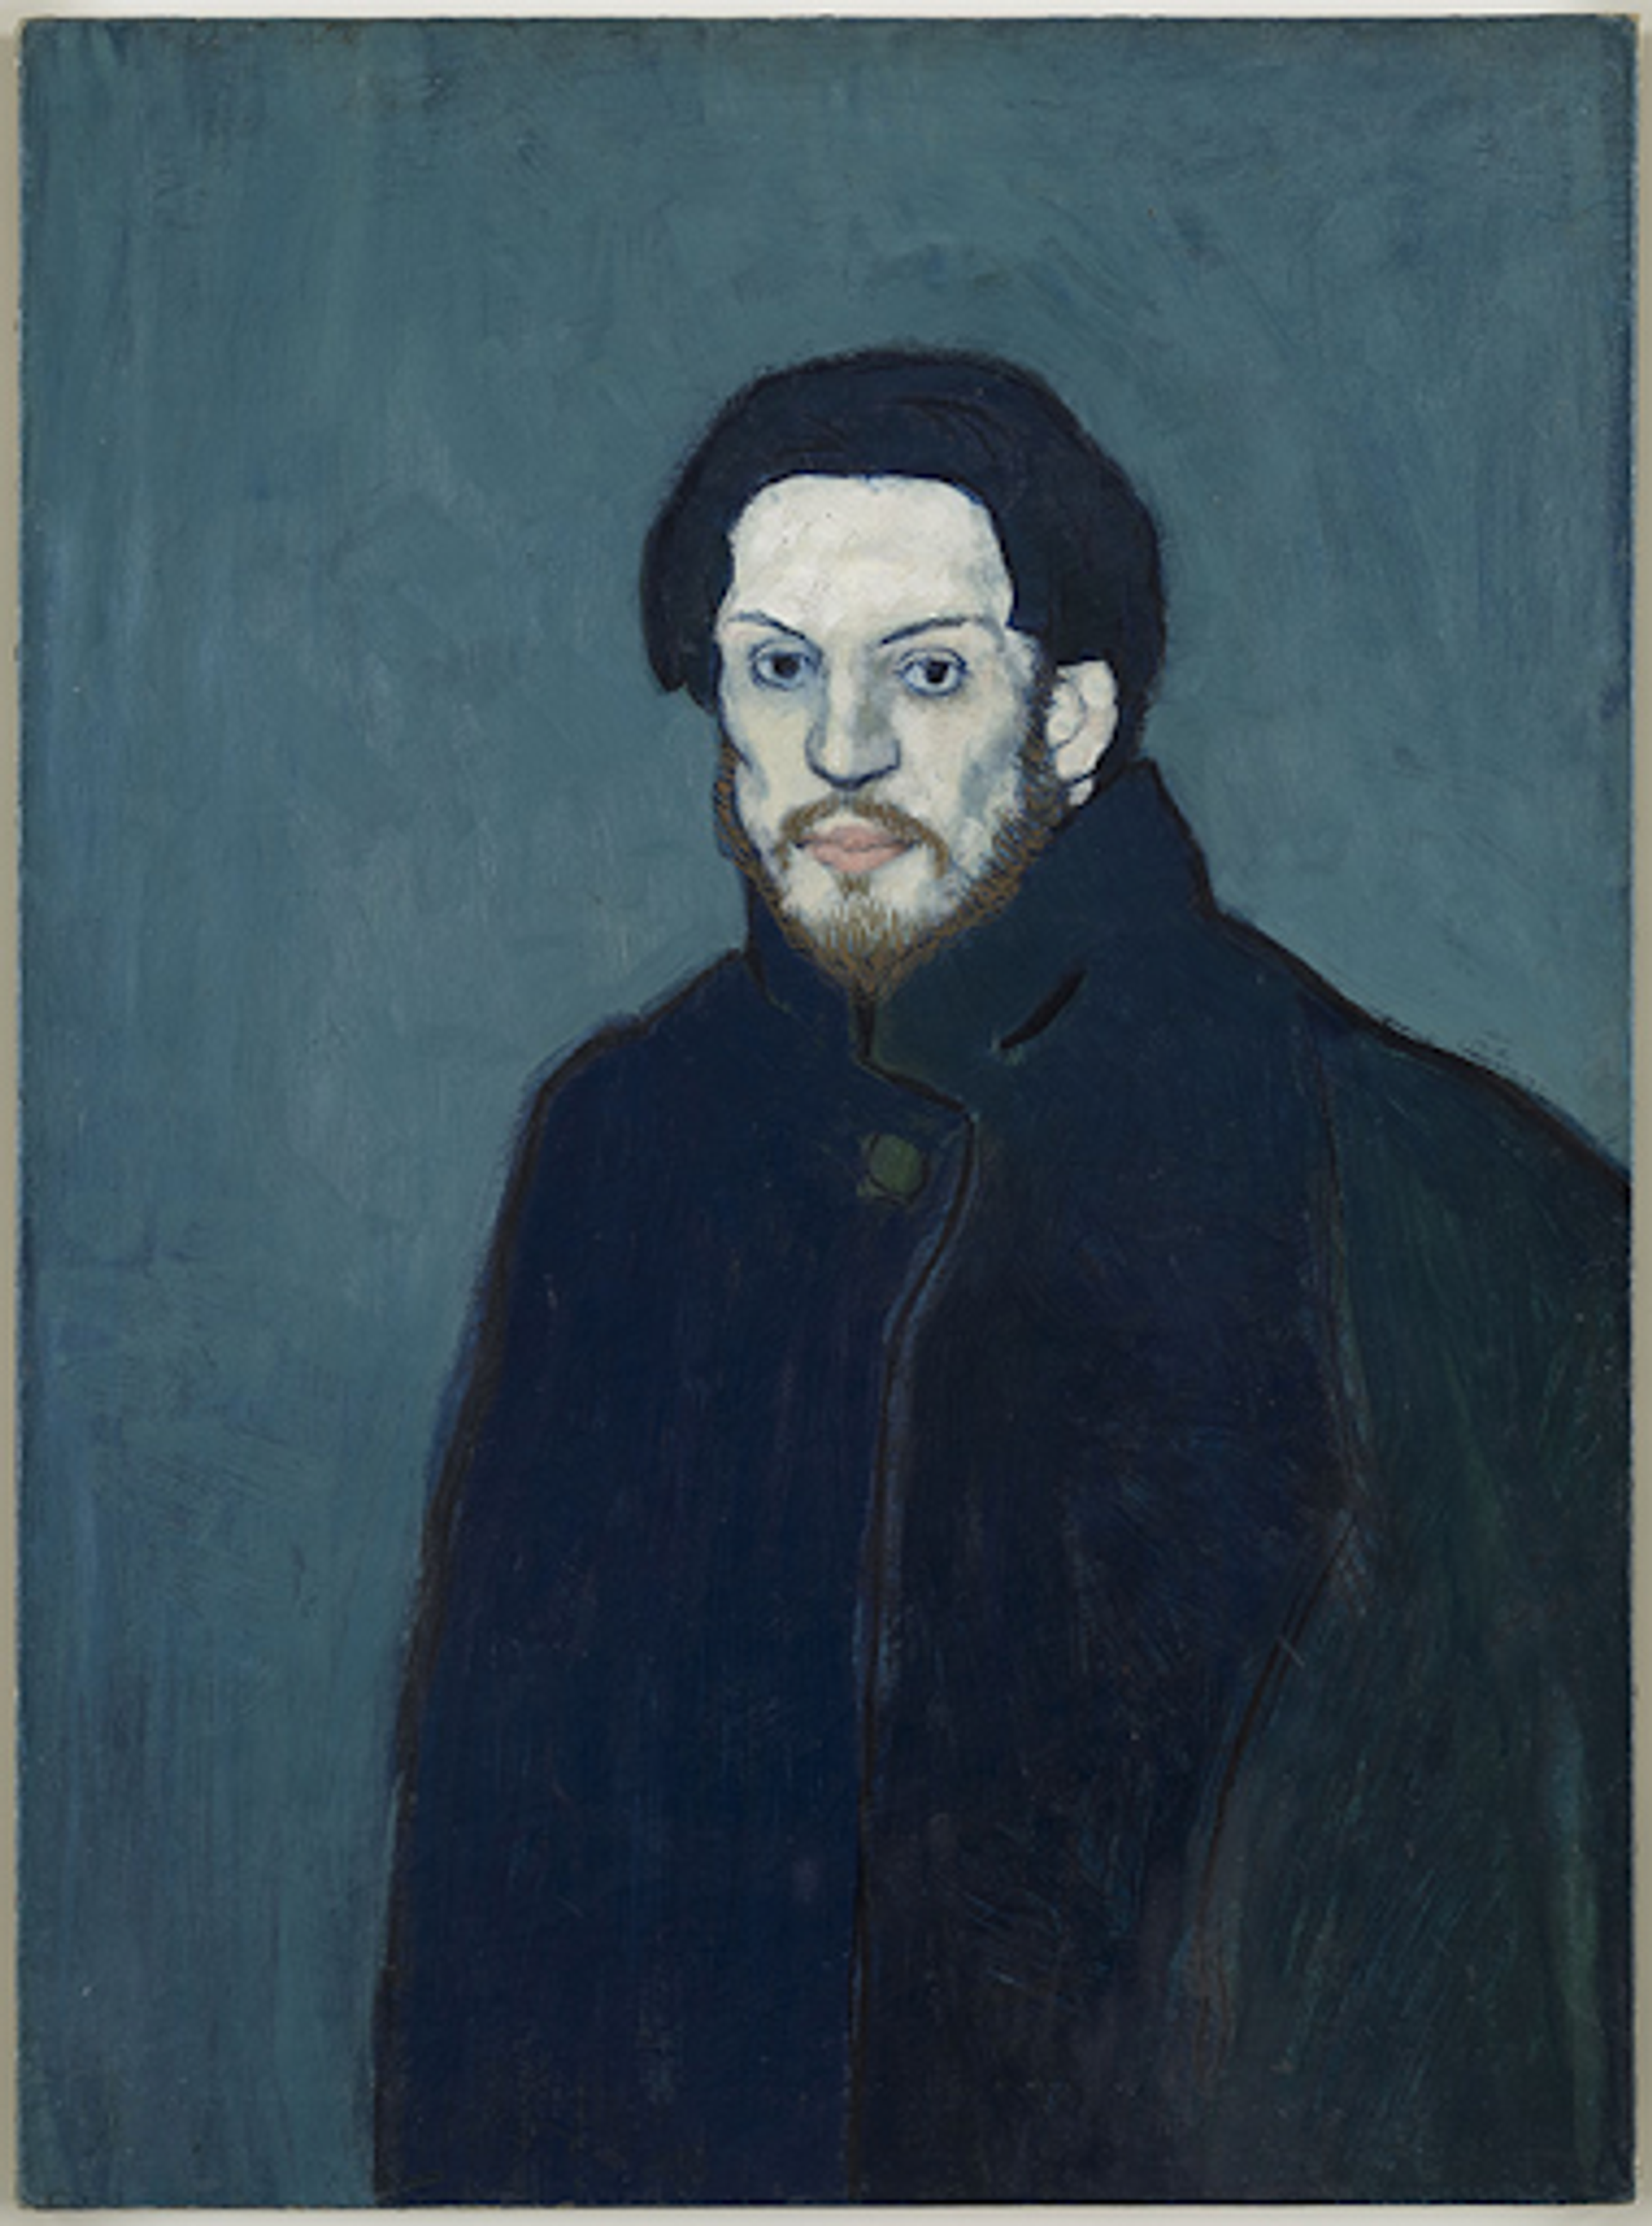 Pablo Picasso’s Autoportrait. A Blue Period painting of a man’s portrait who is dressed in blue, against a blue background with a blue hue to his face. 